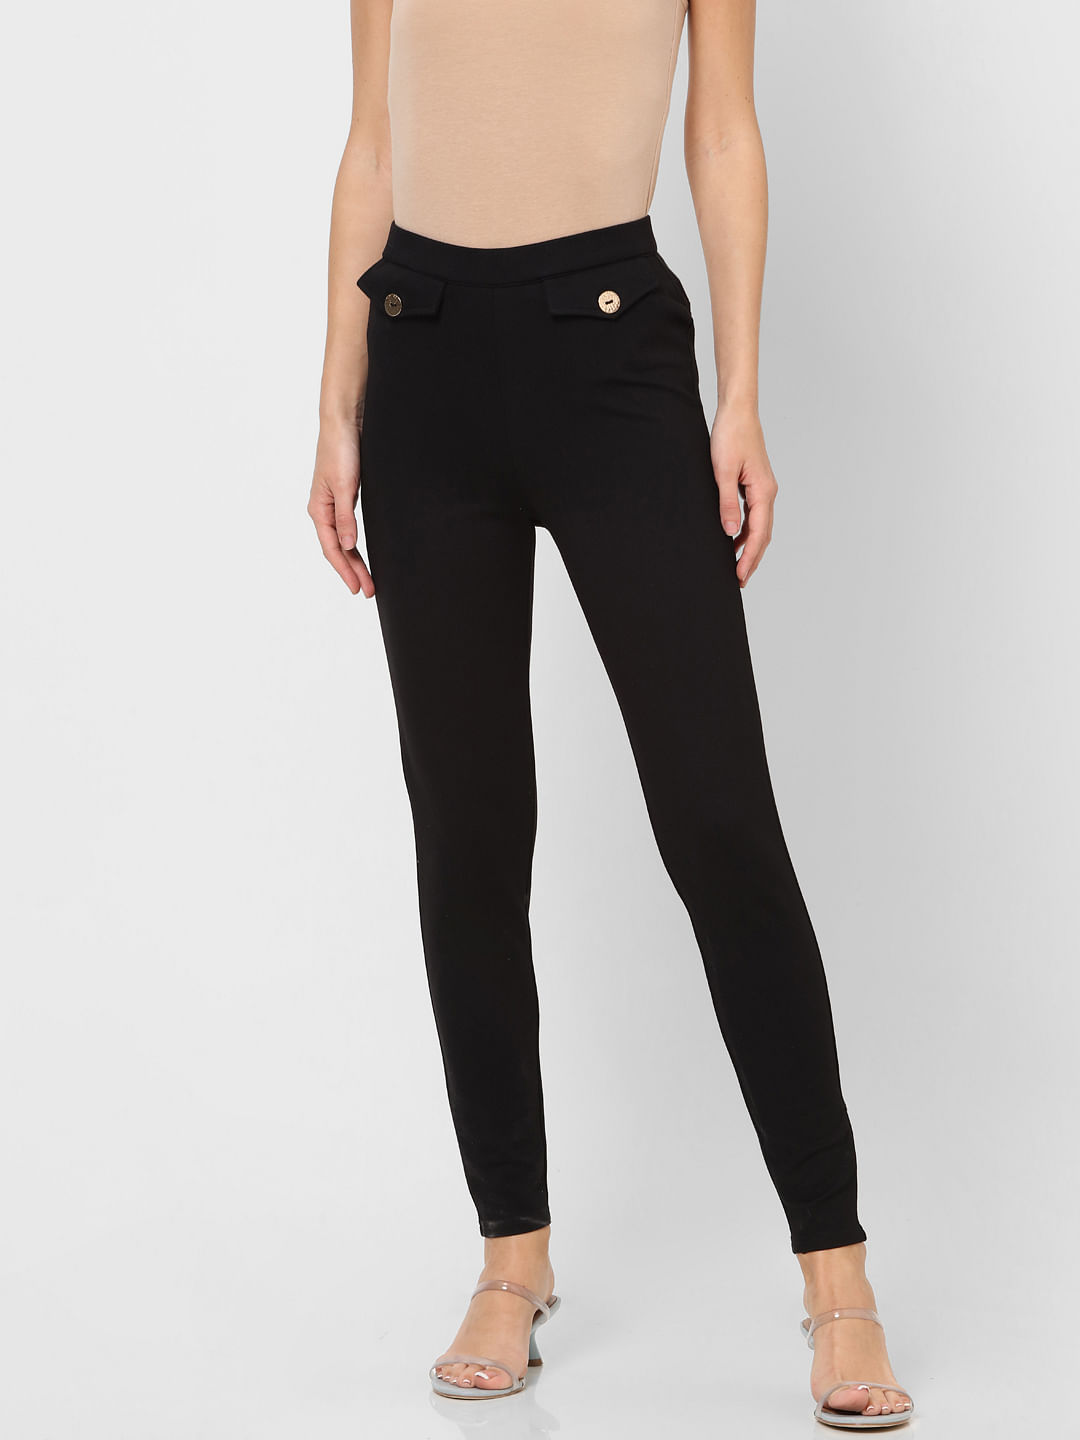 Give It Your All High Waist Active Legging in Black • Impressions Online  Boutique